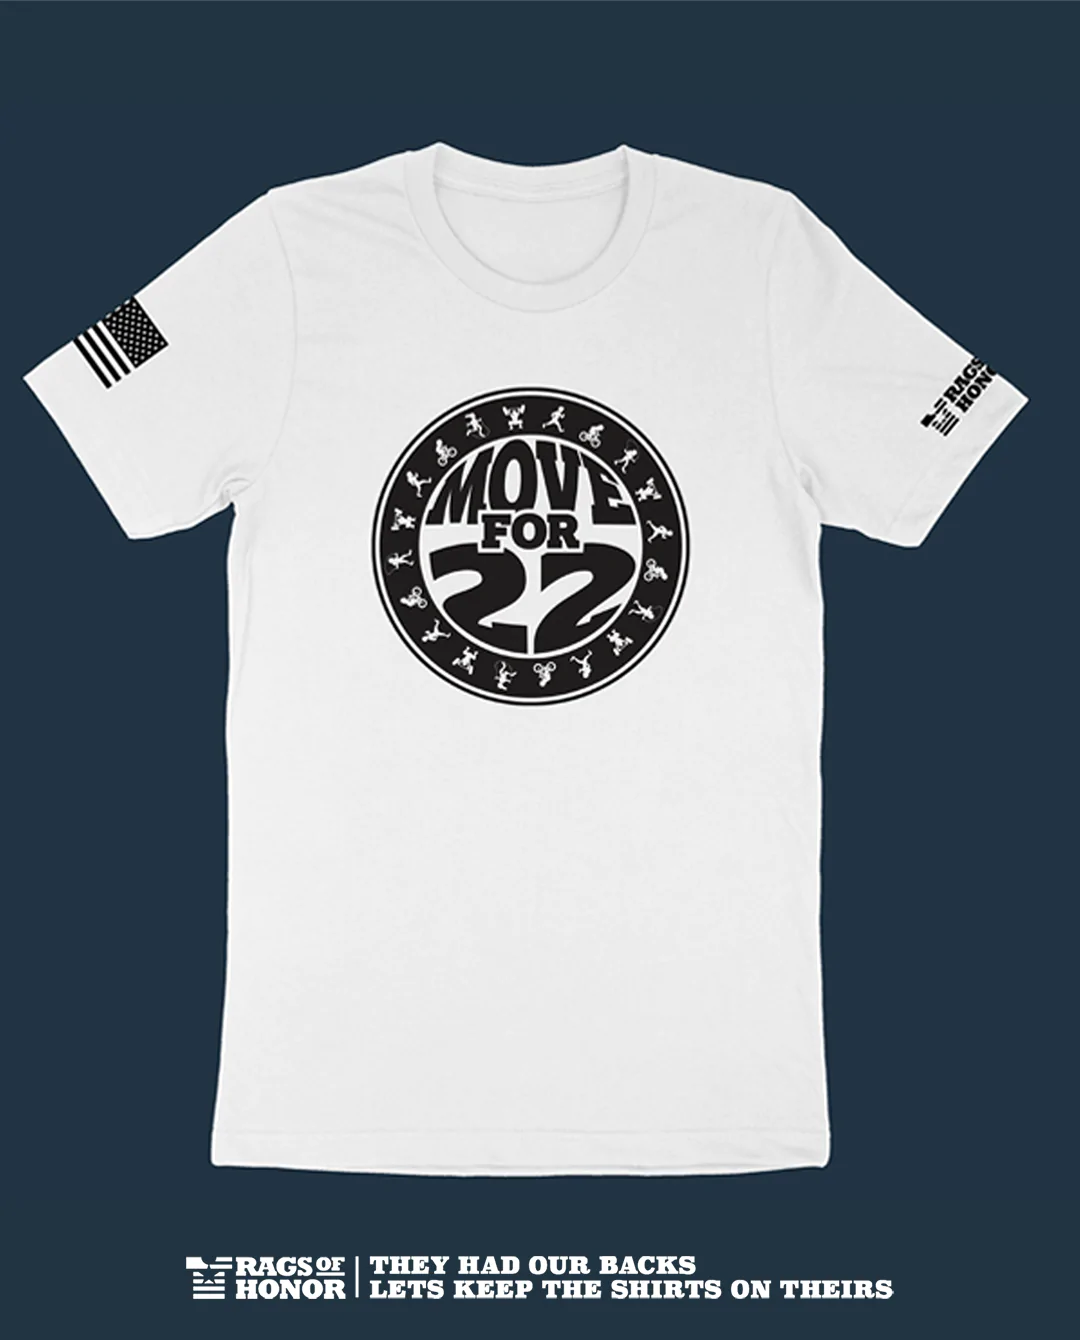 Rags of Honor Move for 22 T-shirt (Unisex)